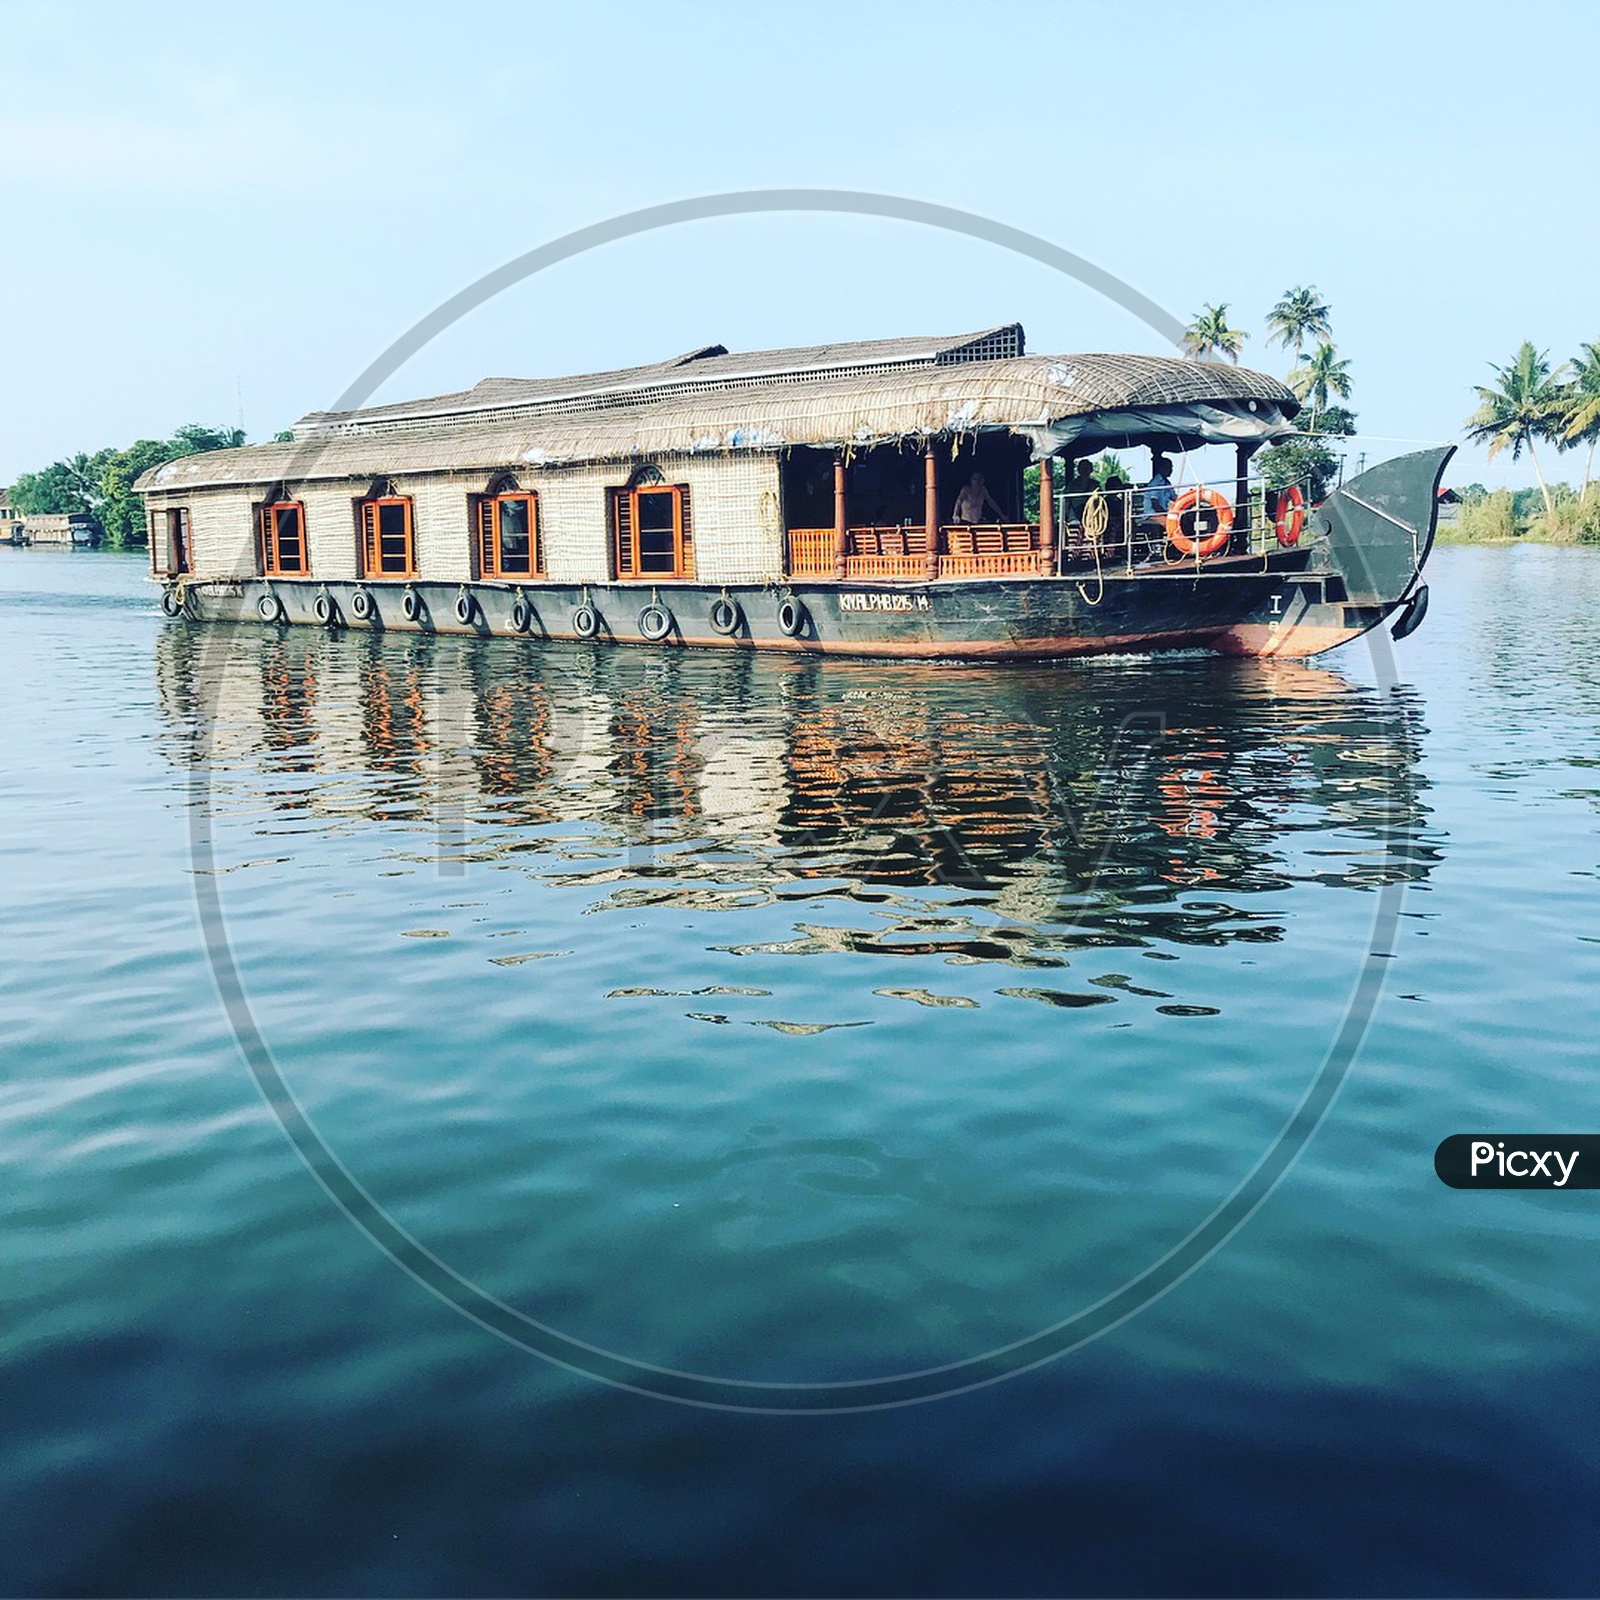 Boating in Back waters of  Alappuzha